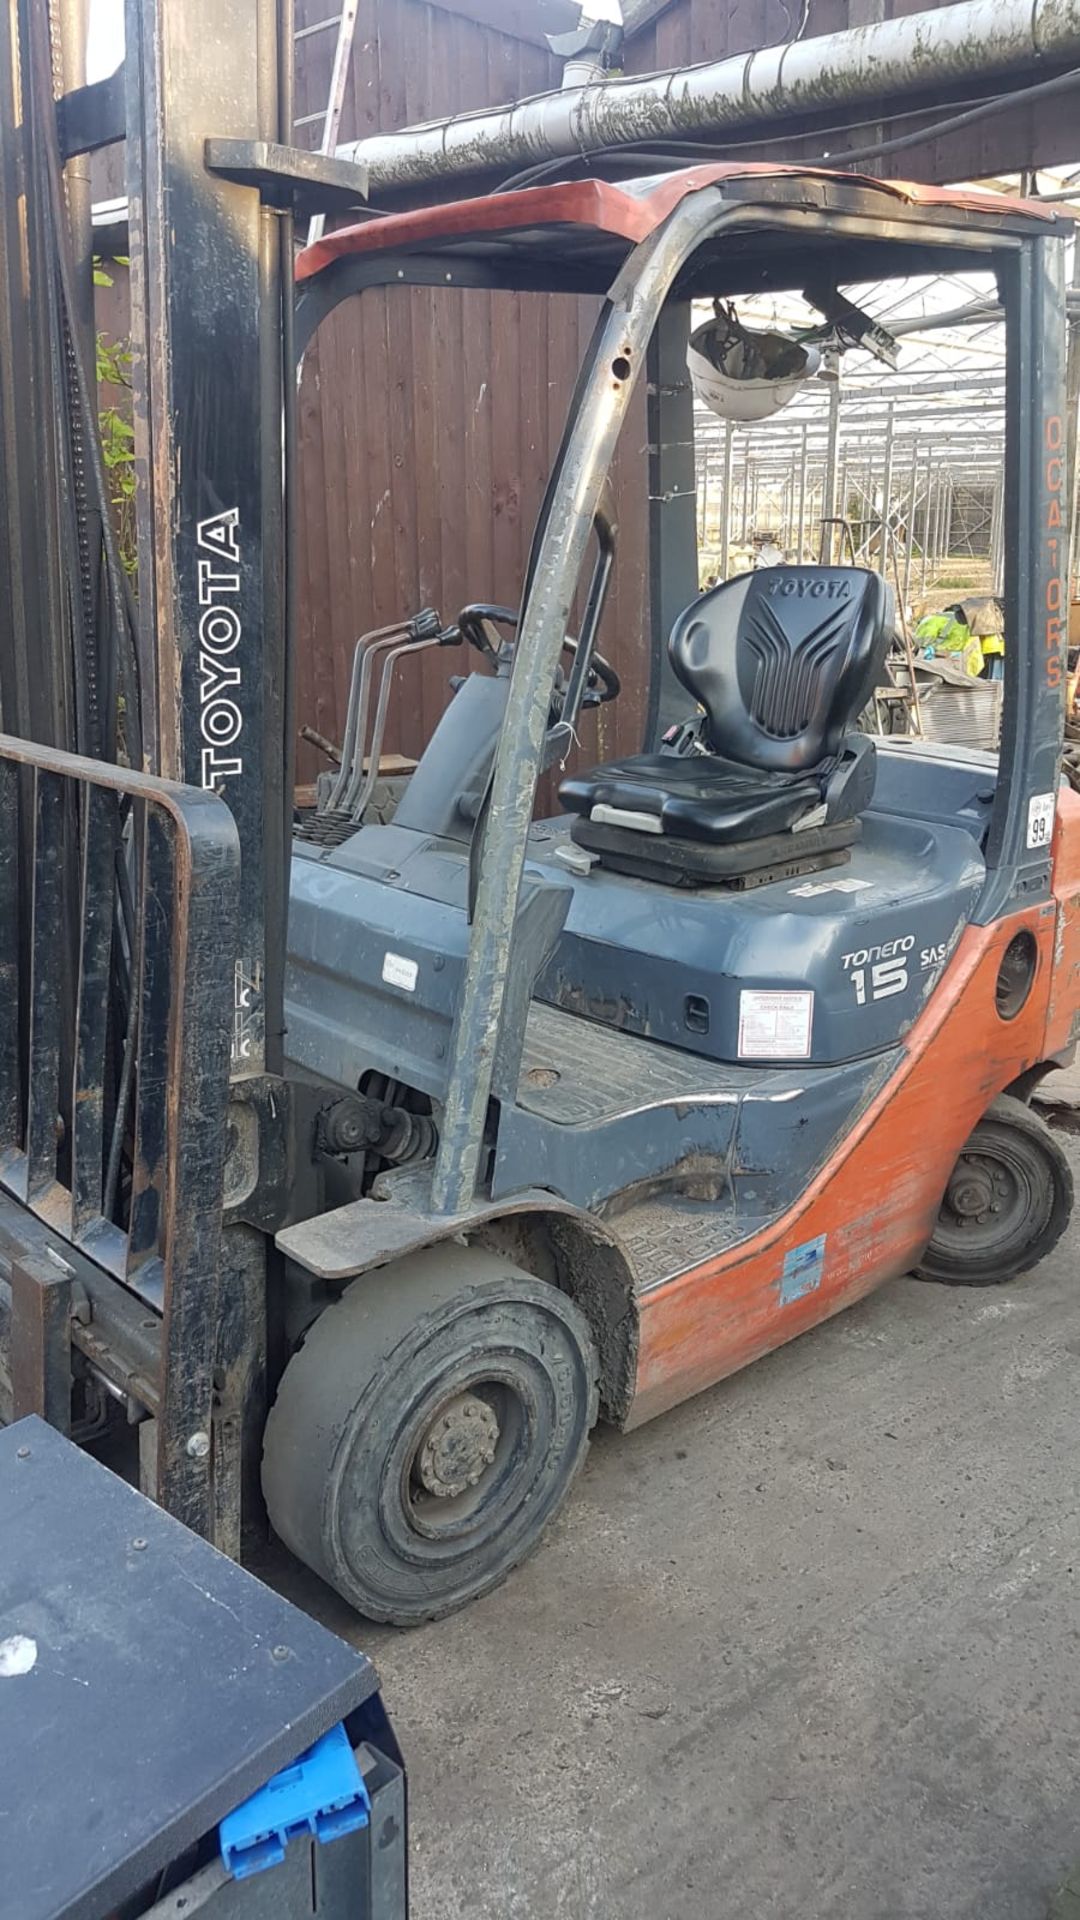 TOYOTA 8FD15 1.5TONNE DIESEL FORKLIFT, YEAR 2007 WITH SIDE SHIFT SN;8FDF18-10277 ......LOCATED IN - Image 2 of 3